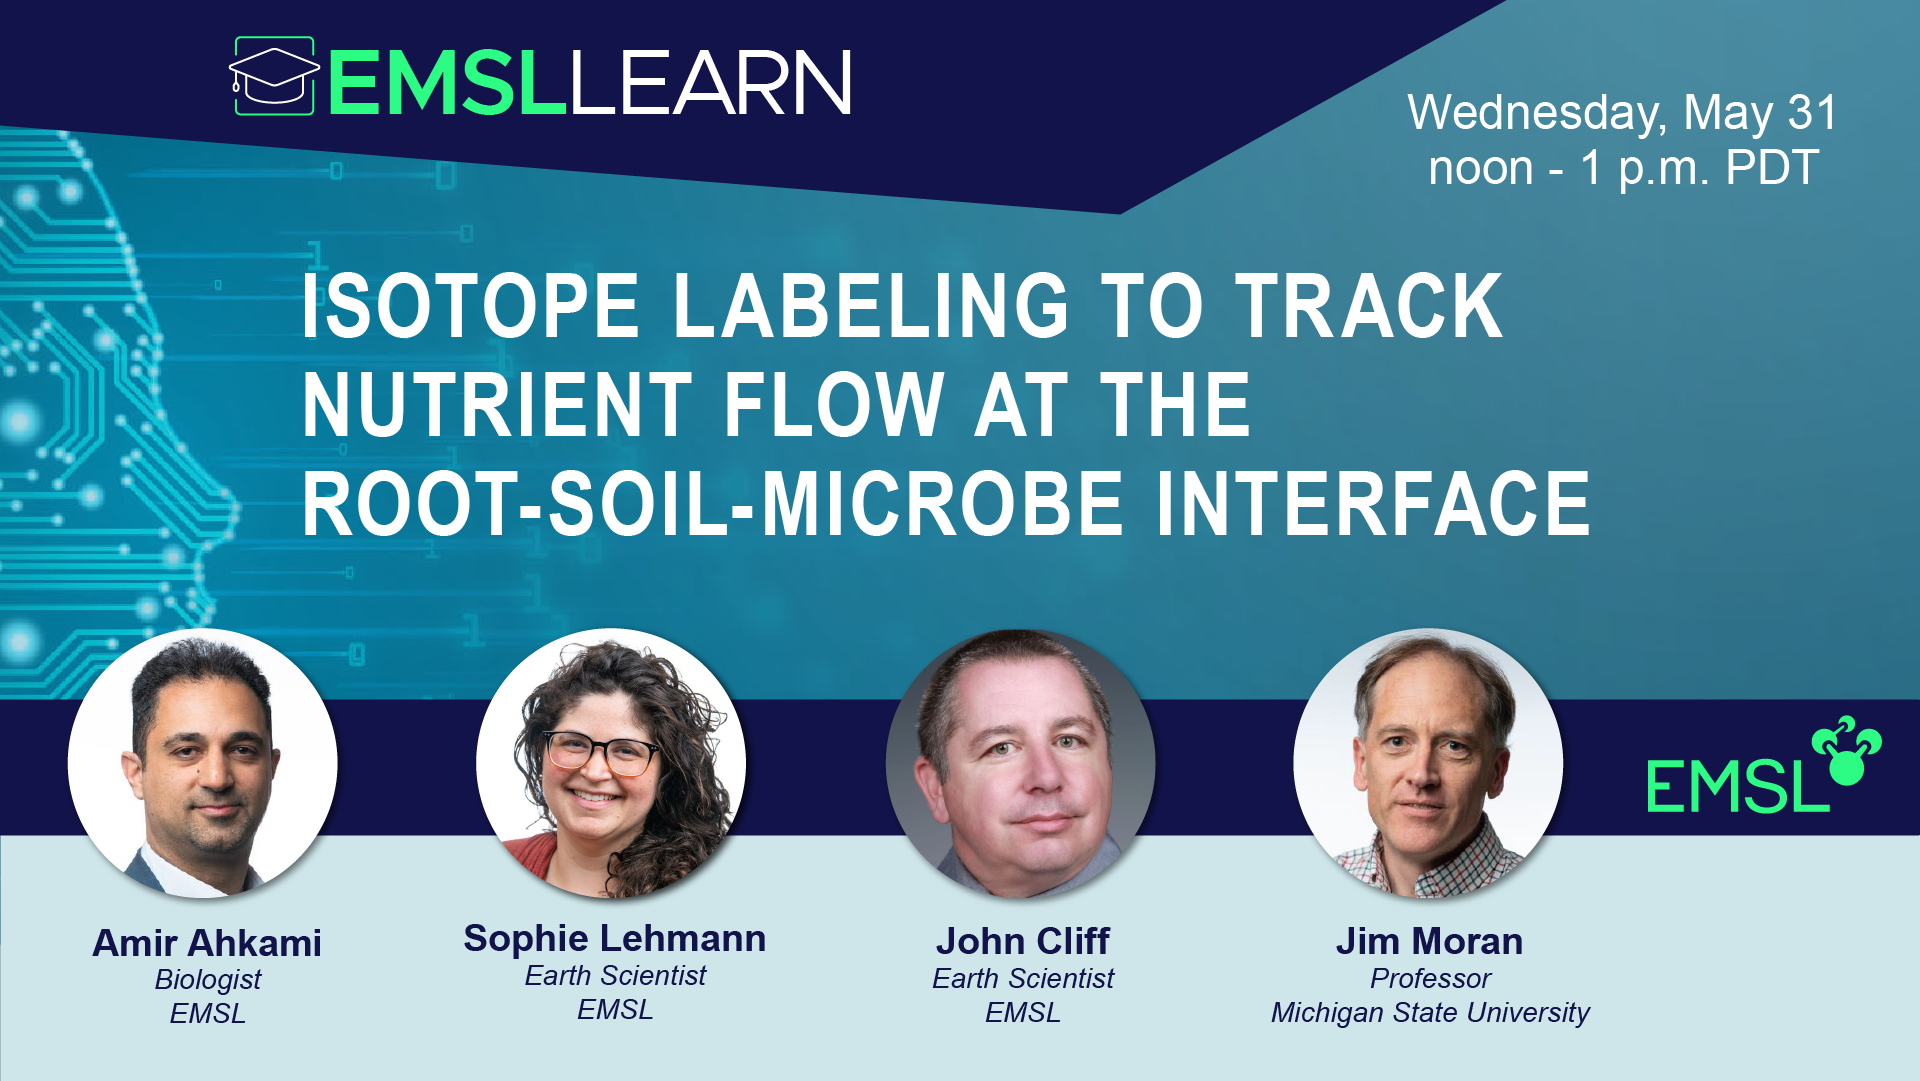 EMSL LEARN Webinar Series presentation in Isotope Labeling at noon Pacific daylight time on Wednesday, May 31, 2023.